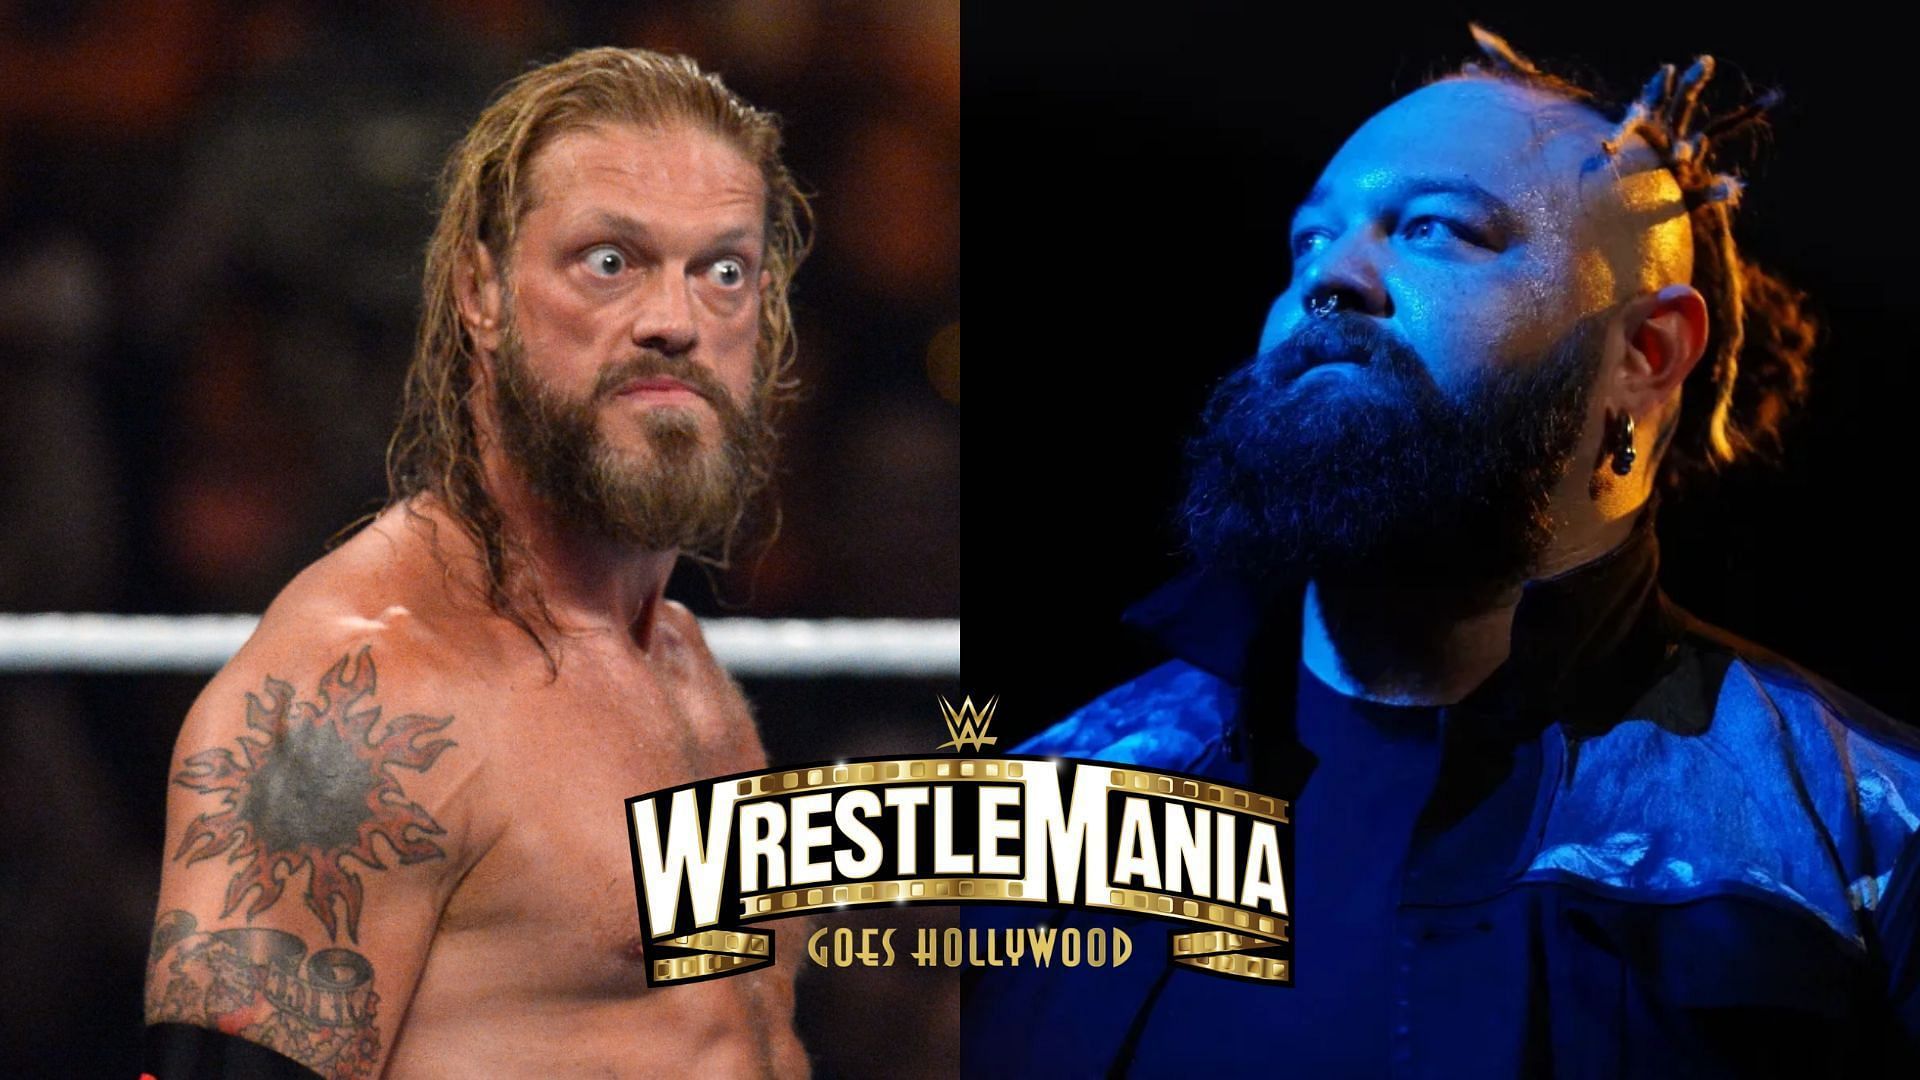 Edge could be the perfect opponent for Bray Wyatt at WrestleMania 39